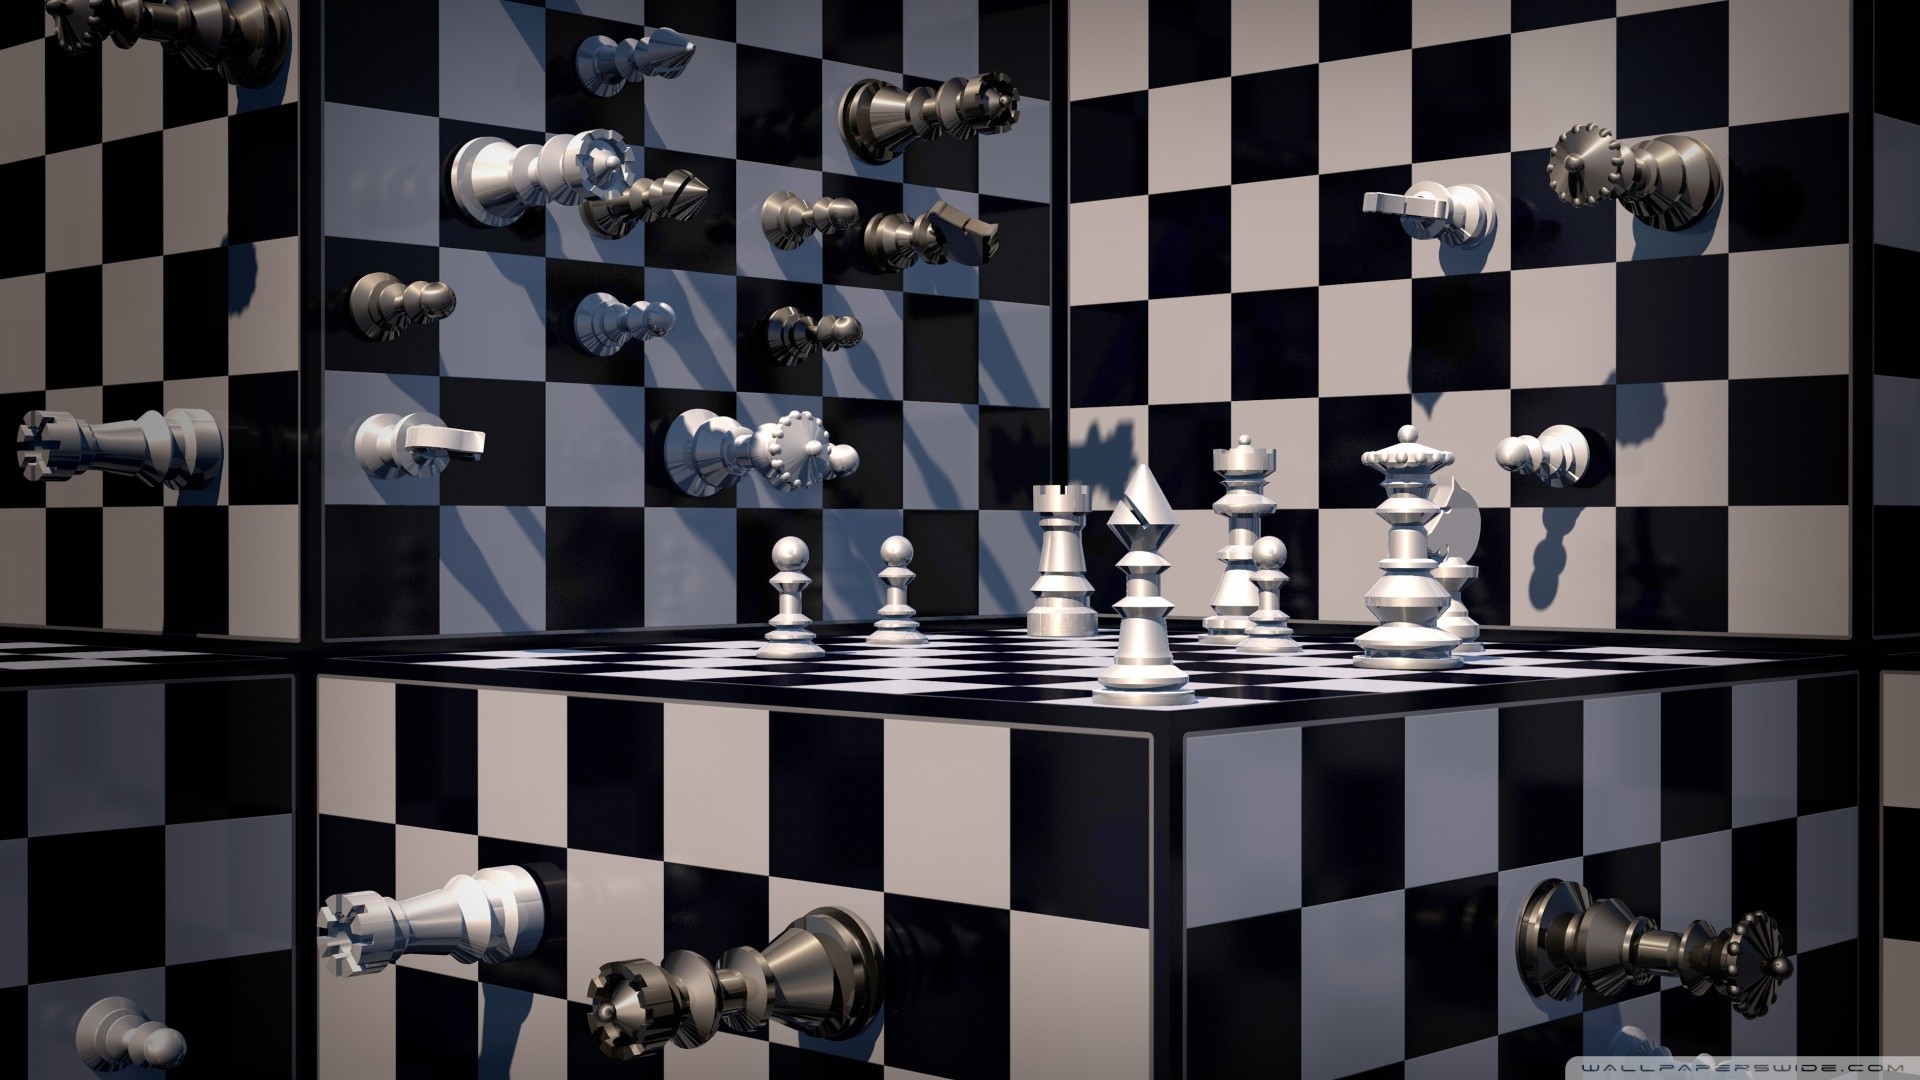 Cool Chess Wallpapers